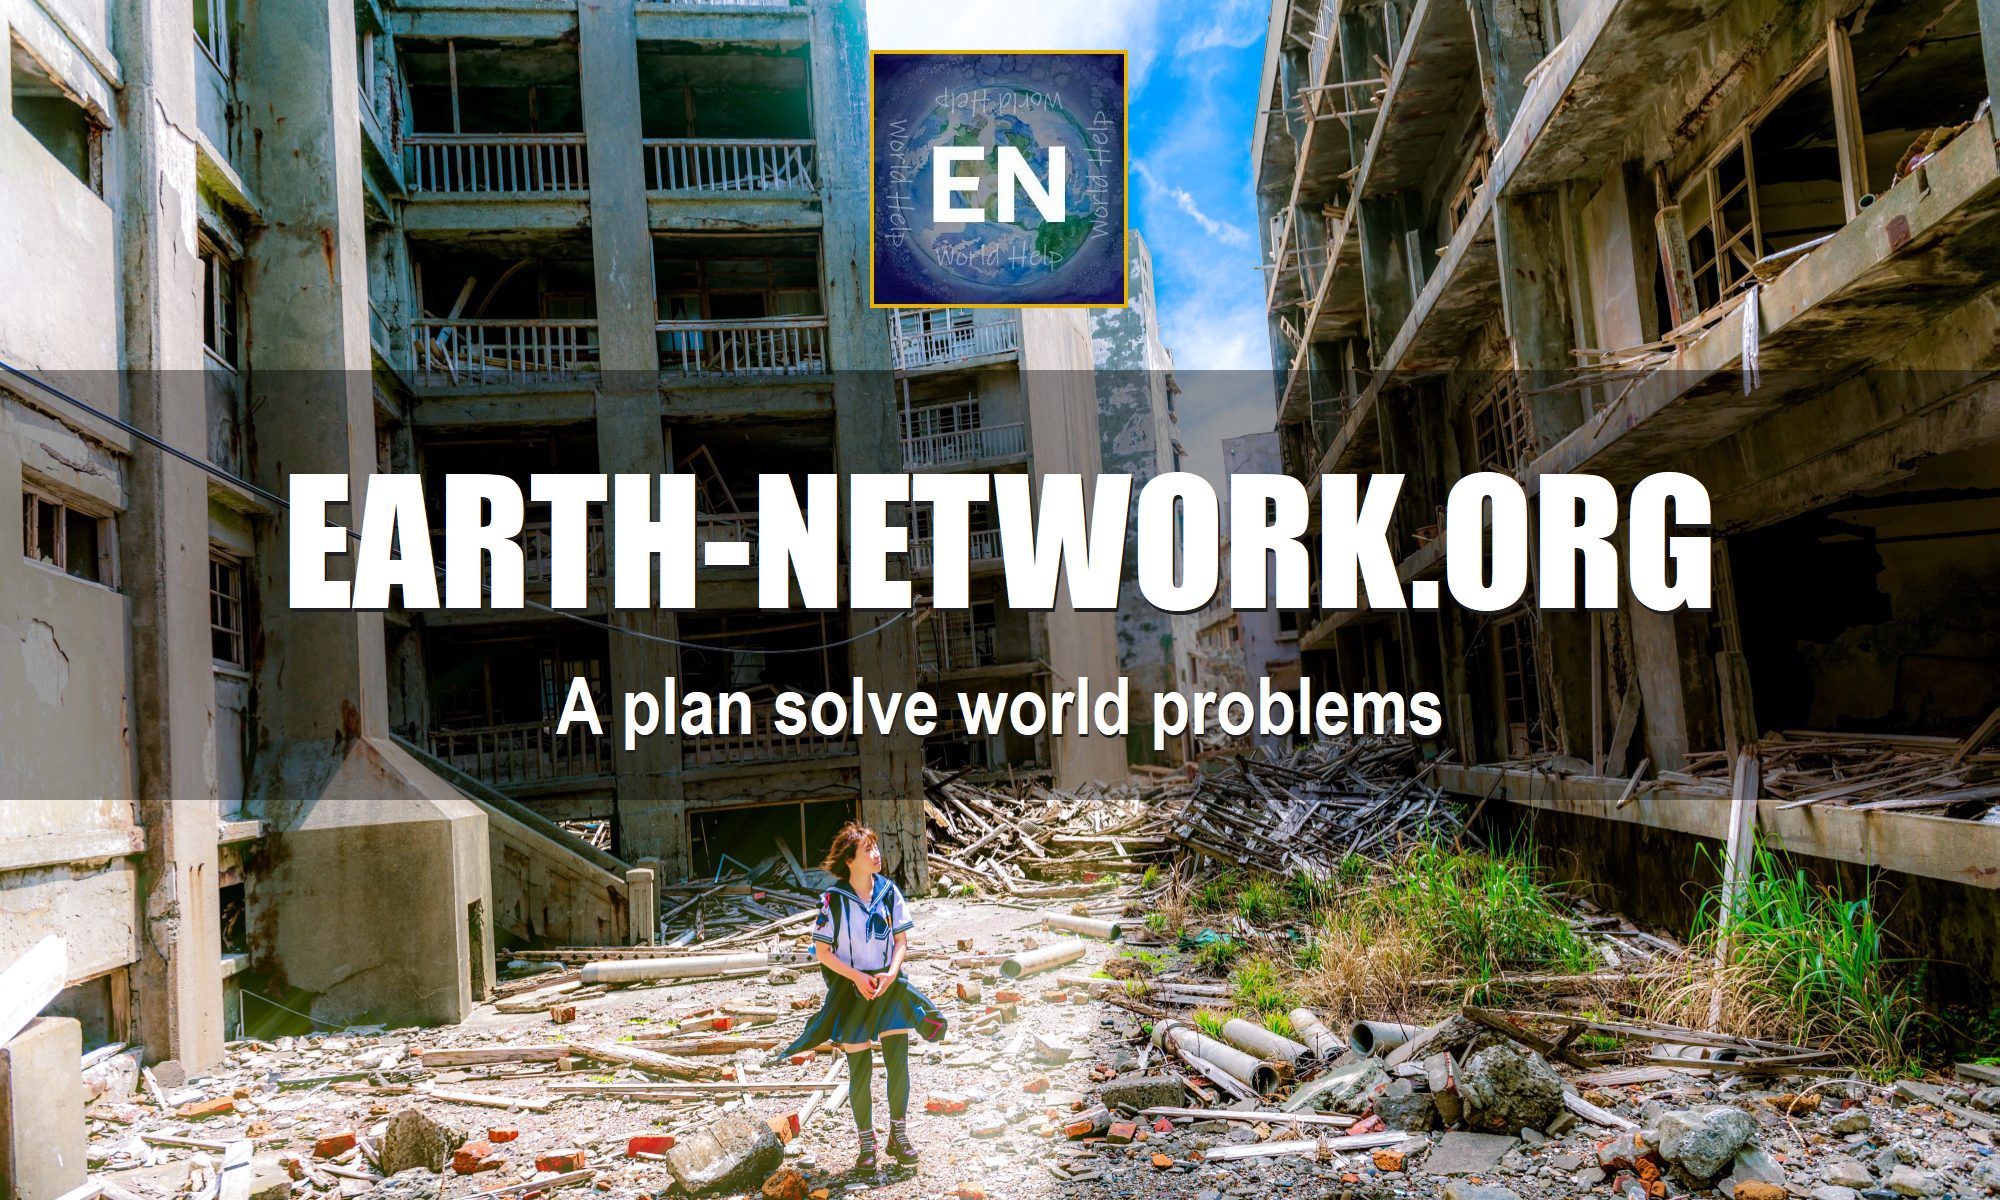 EARTH NETWORK EN Plan to solve world problems William Eastwood nonprofit charity initiative